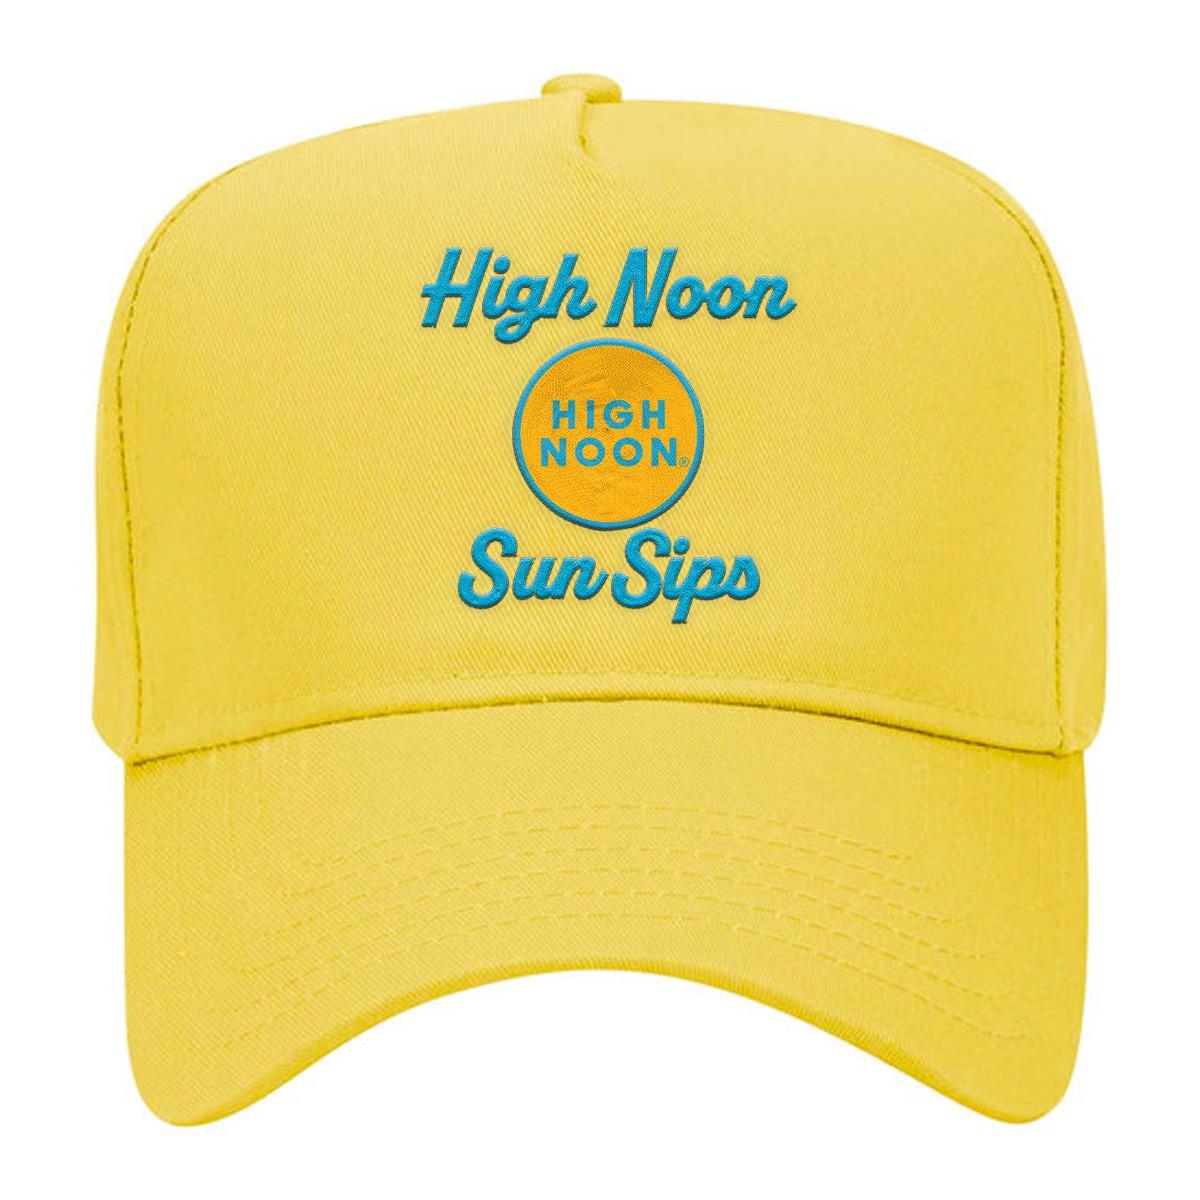 High Noon Sun Sips Snapback Hat-Hats-Nooners-Yellow-One Size-Barstool Sports